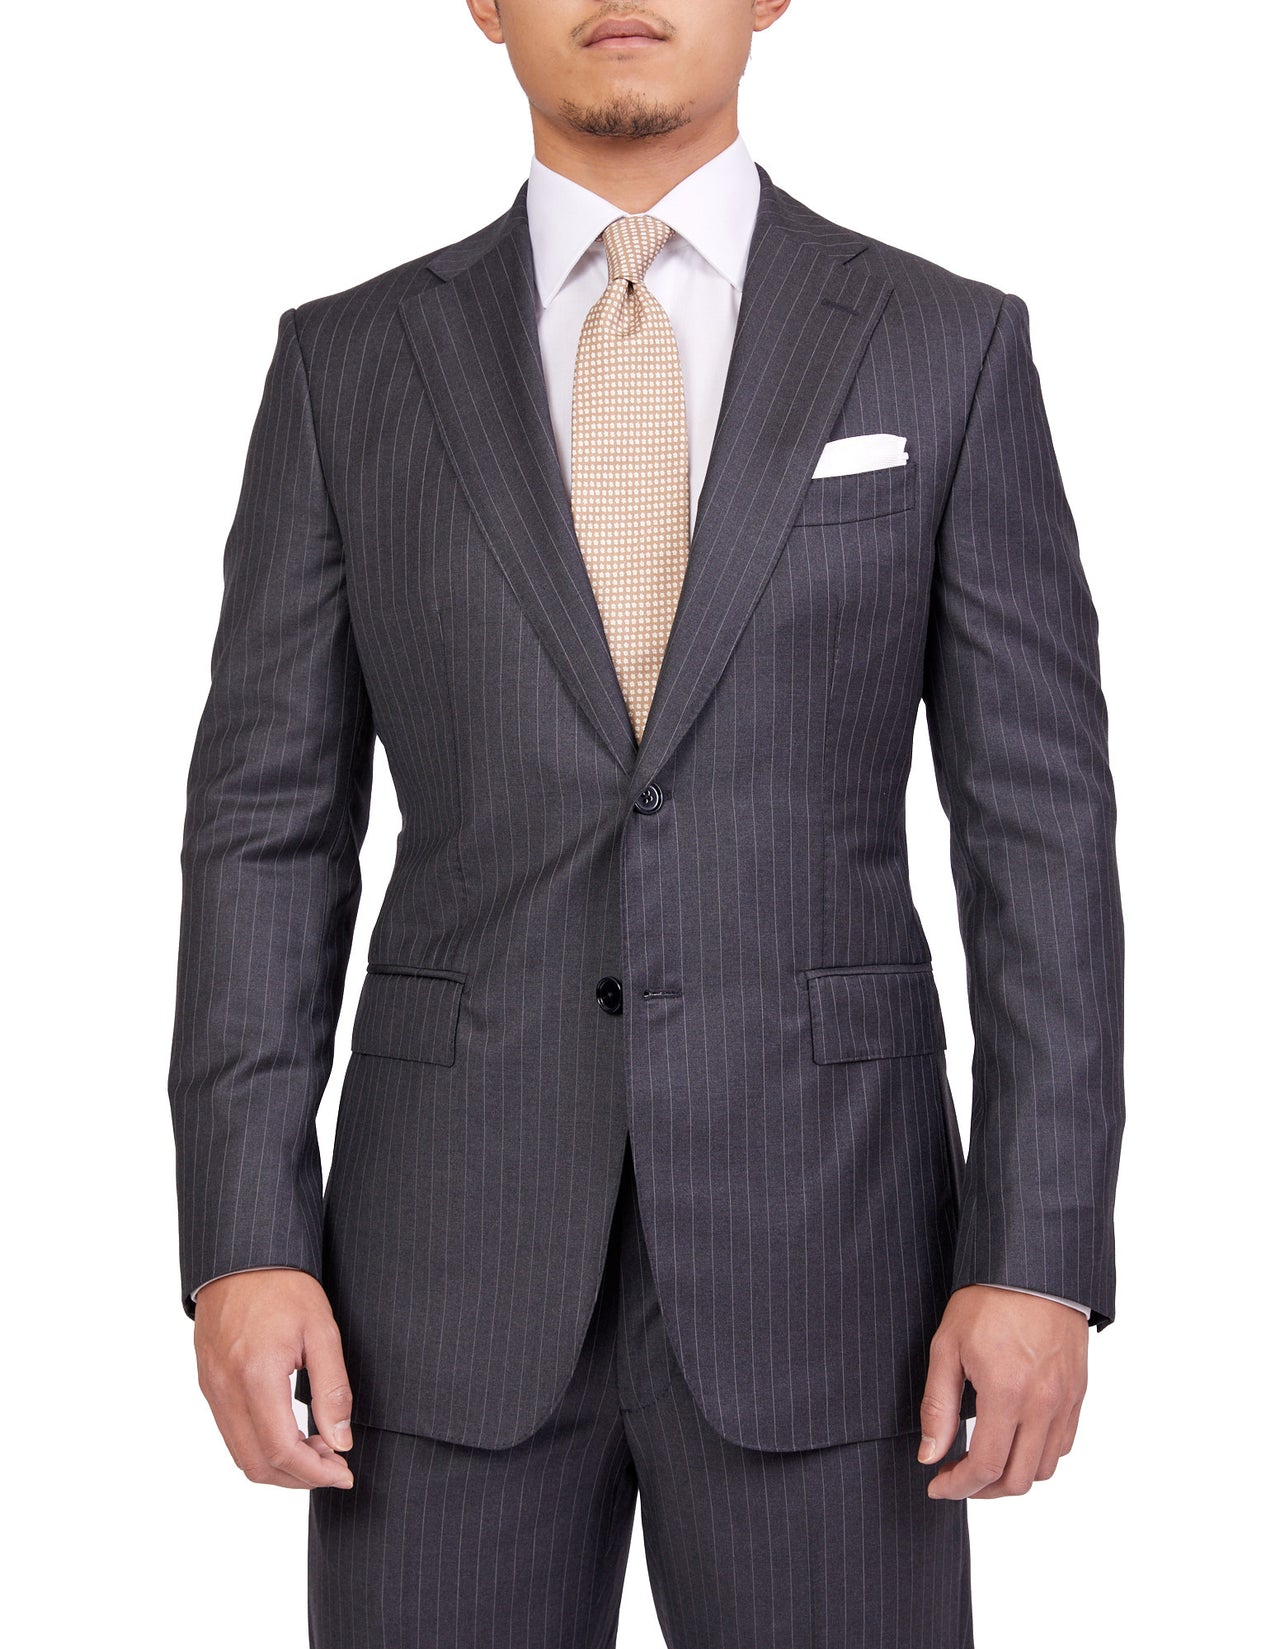 HENRY SARTORIAL Dun Full Canvas Stripe Suit CHARCOAL LG